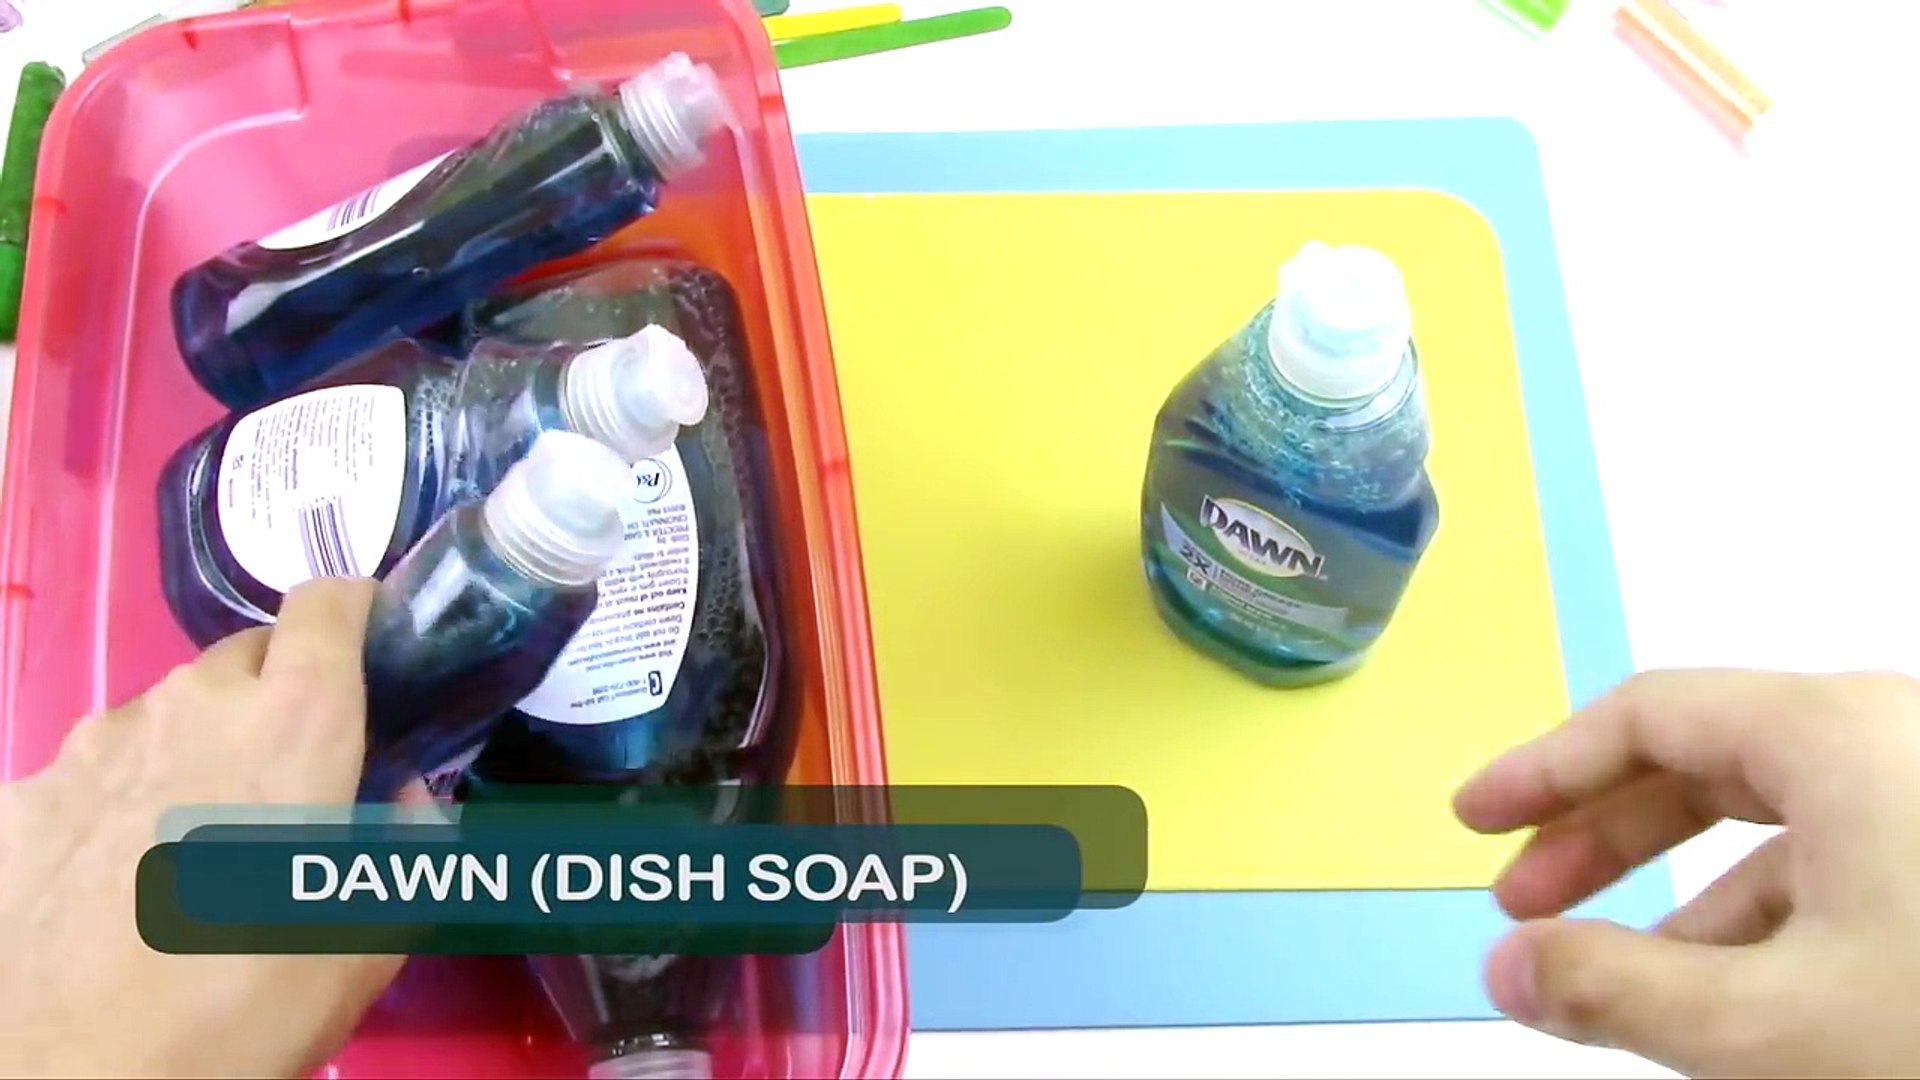 How To Make Dish Soap Slime Giant Fluffy Slime Without Shaving Cream Borax Baking Soda Detergent